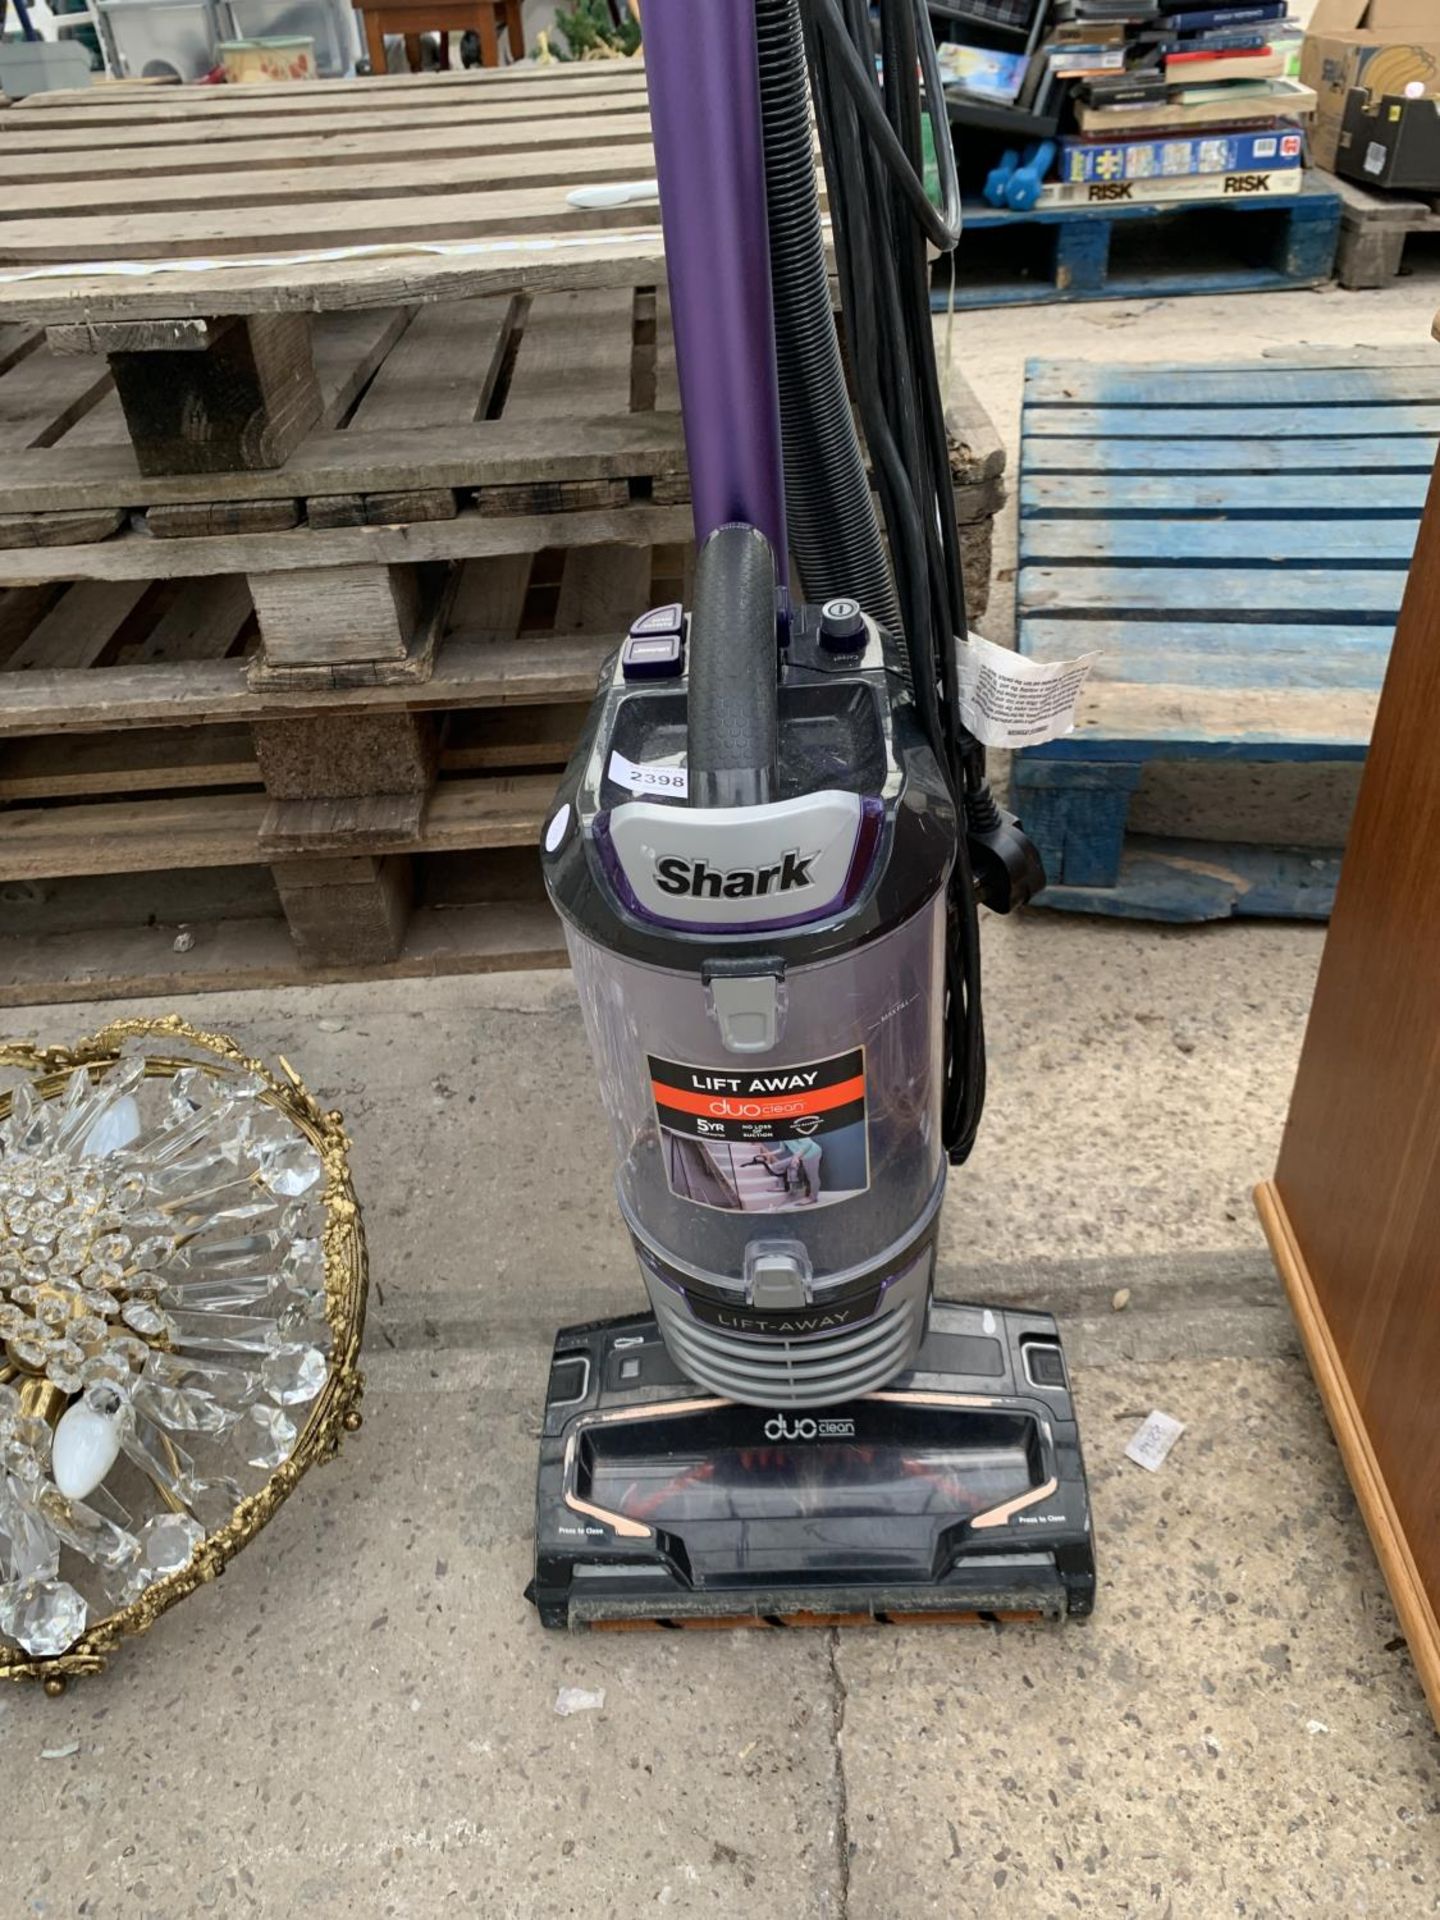 A SHARK DUO CLEAN LIFT AWAY VACUUM CLEANER - Image 2 of 2